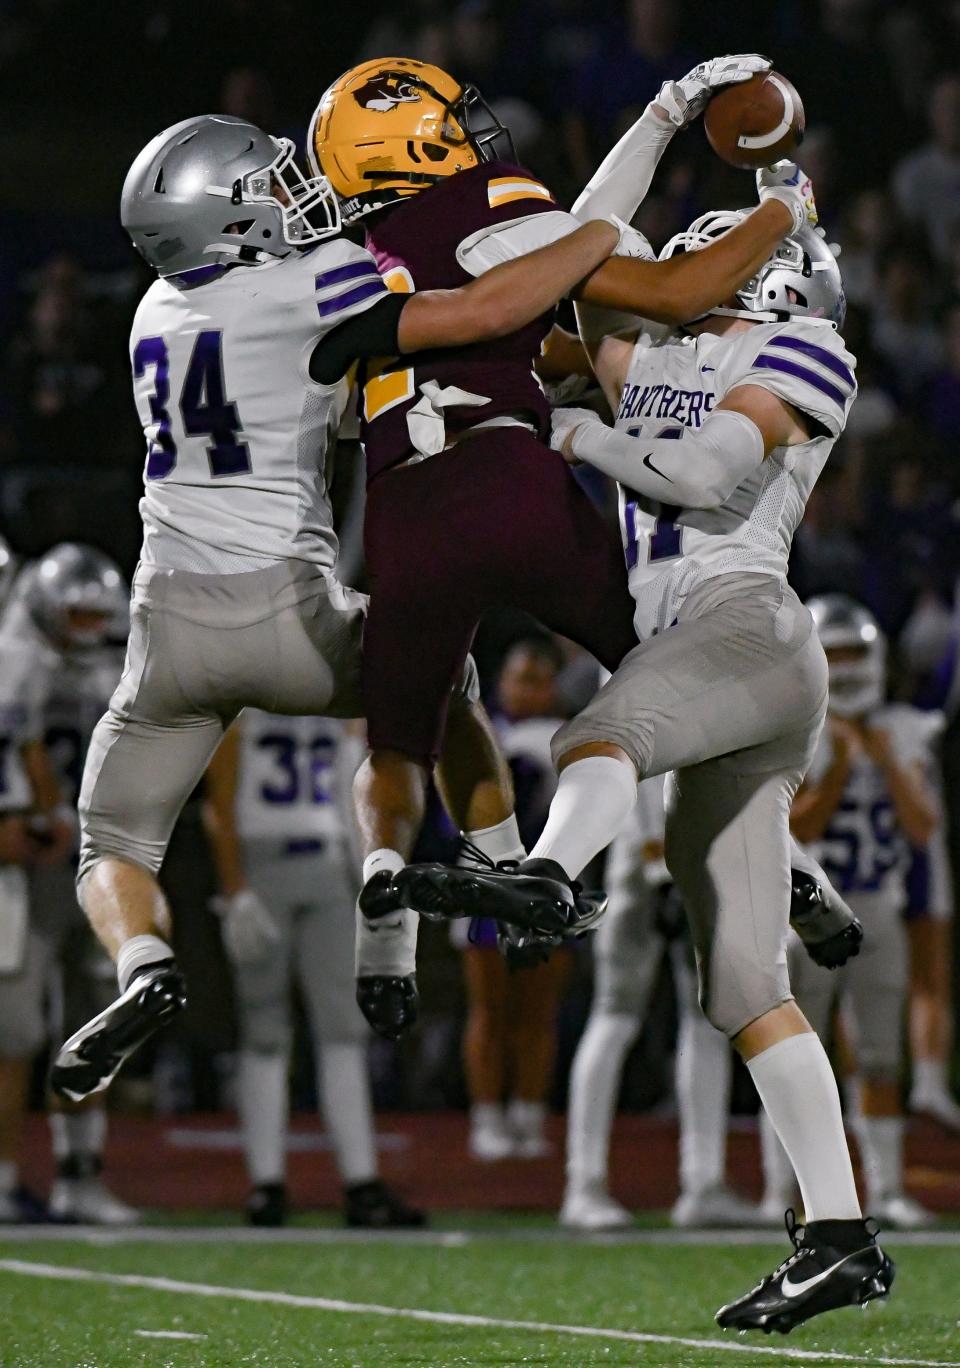 Bloomington South’s Evan Roudebush (34) and Miles McKay (11) break up a pass intended for Bloomington North’s Jorian Brooks (12) during the IHSAA sectional semi-final football game at Bloomington North on Friday, Oct. 27, 2023.